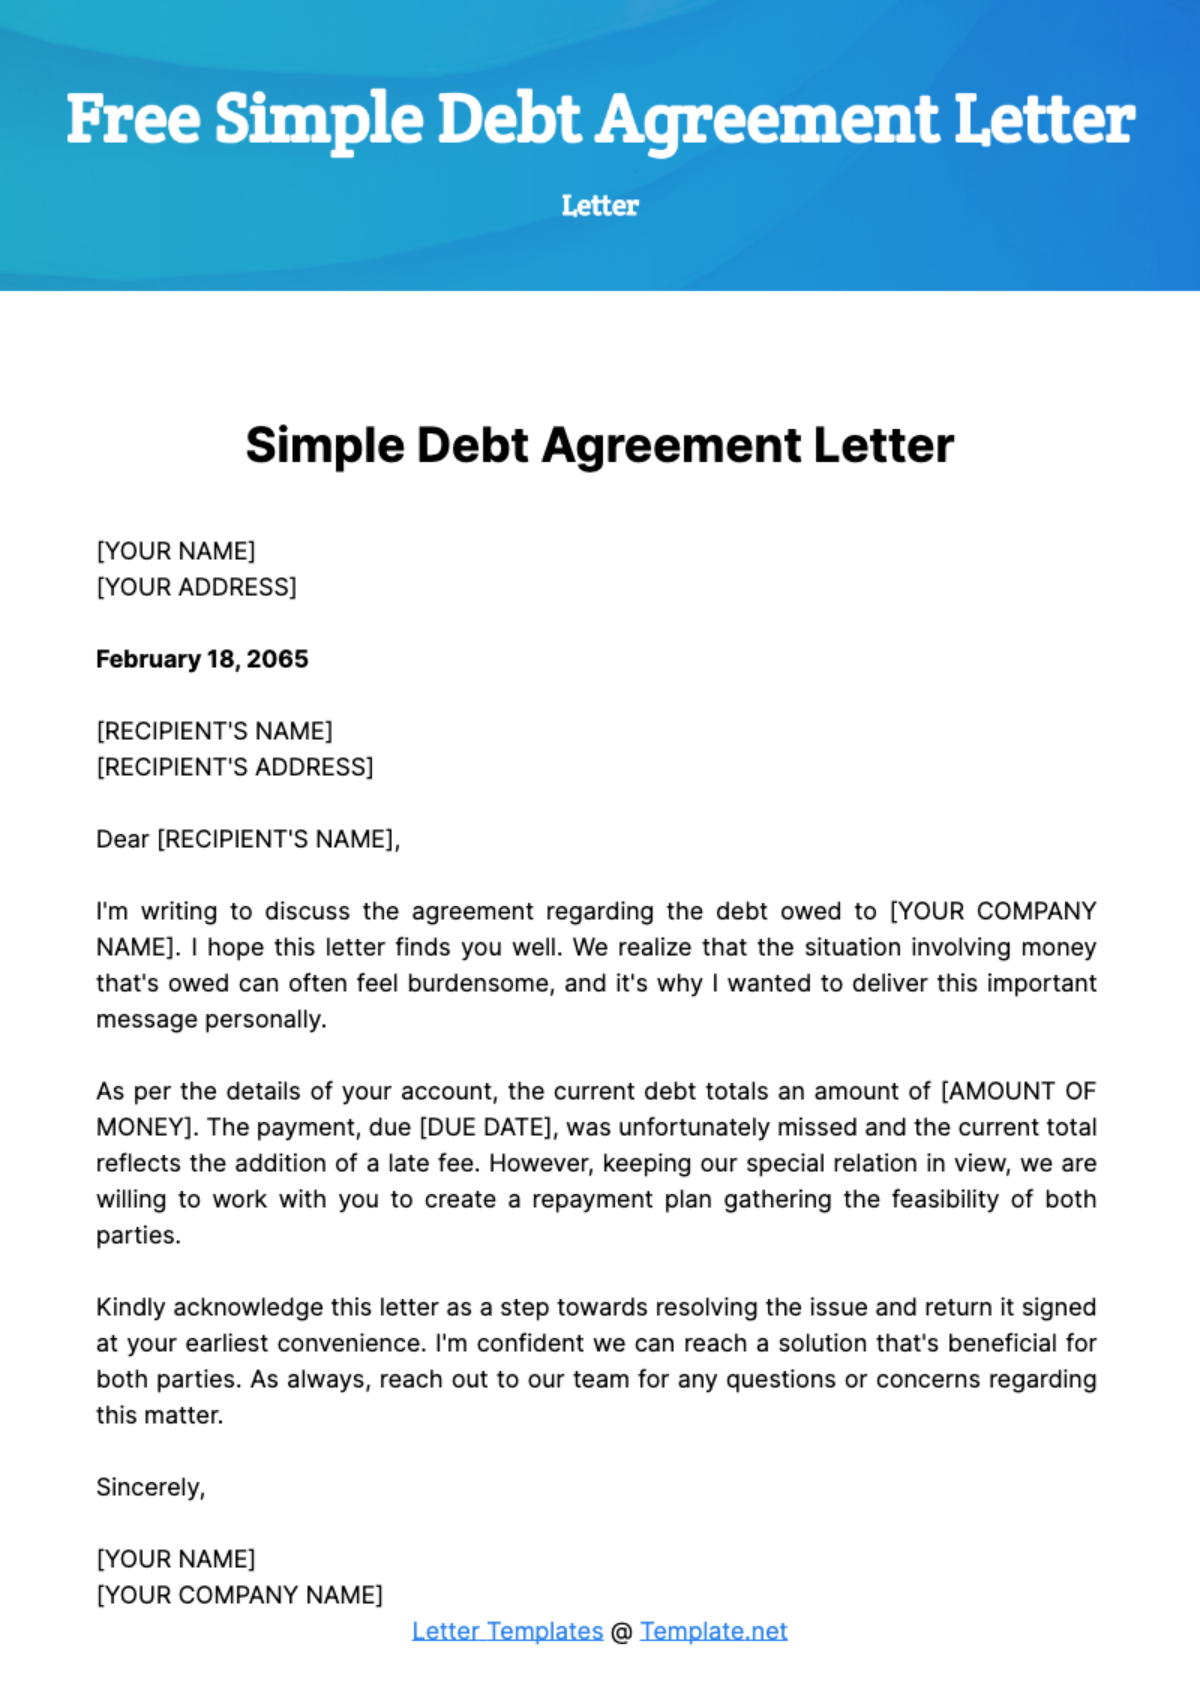 Free Simple Debt Agreement Letter Template